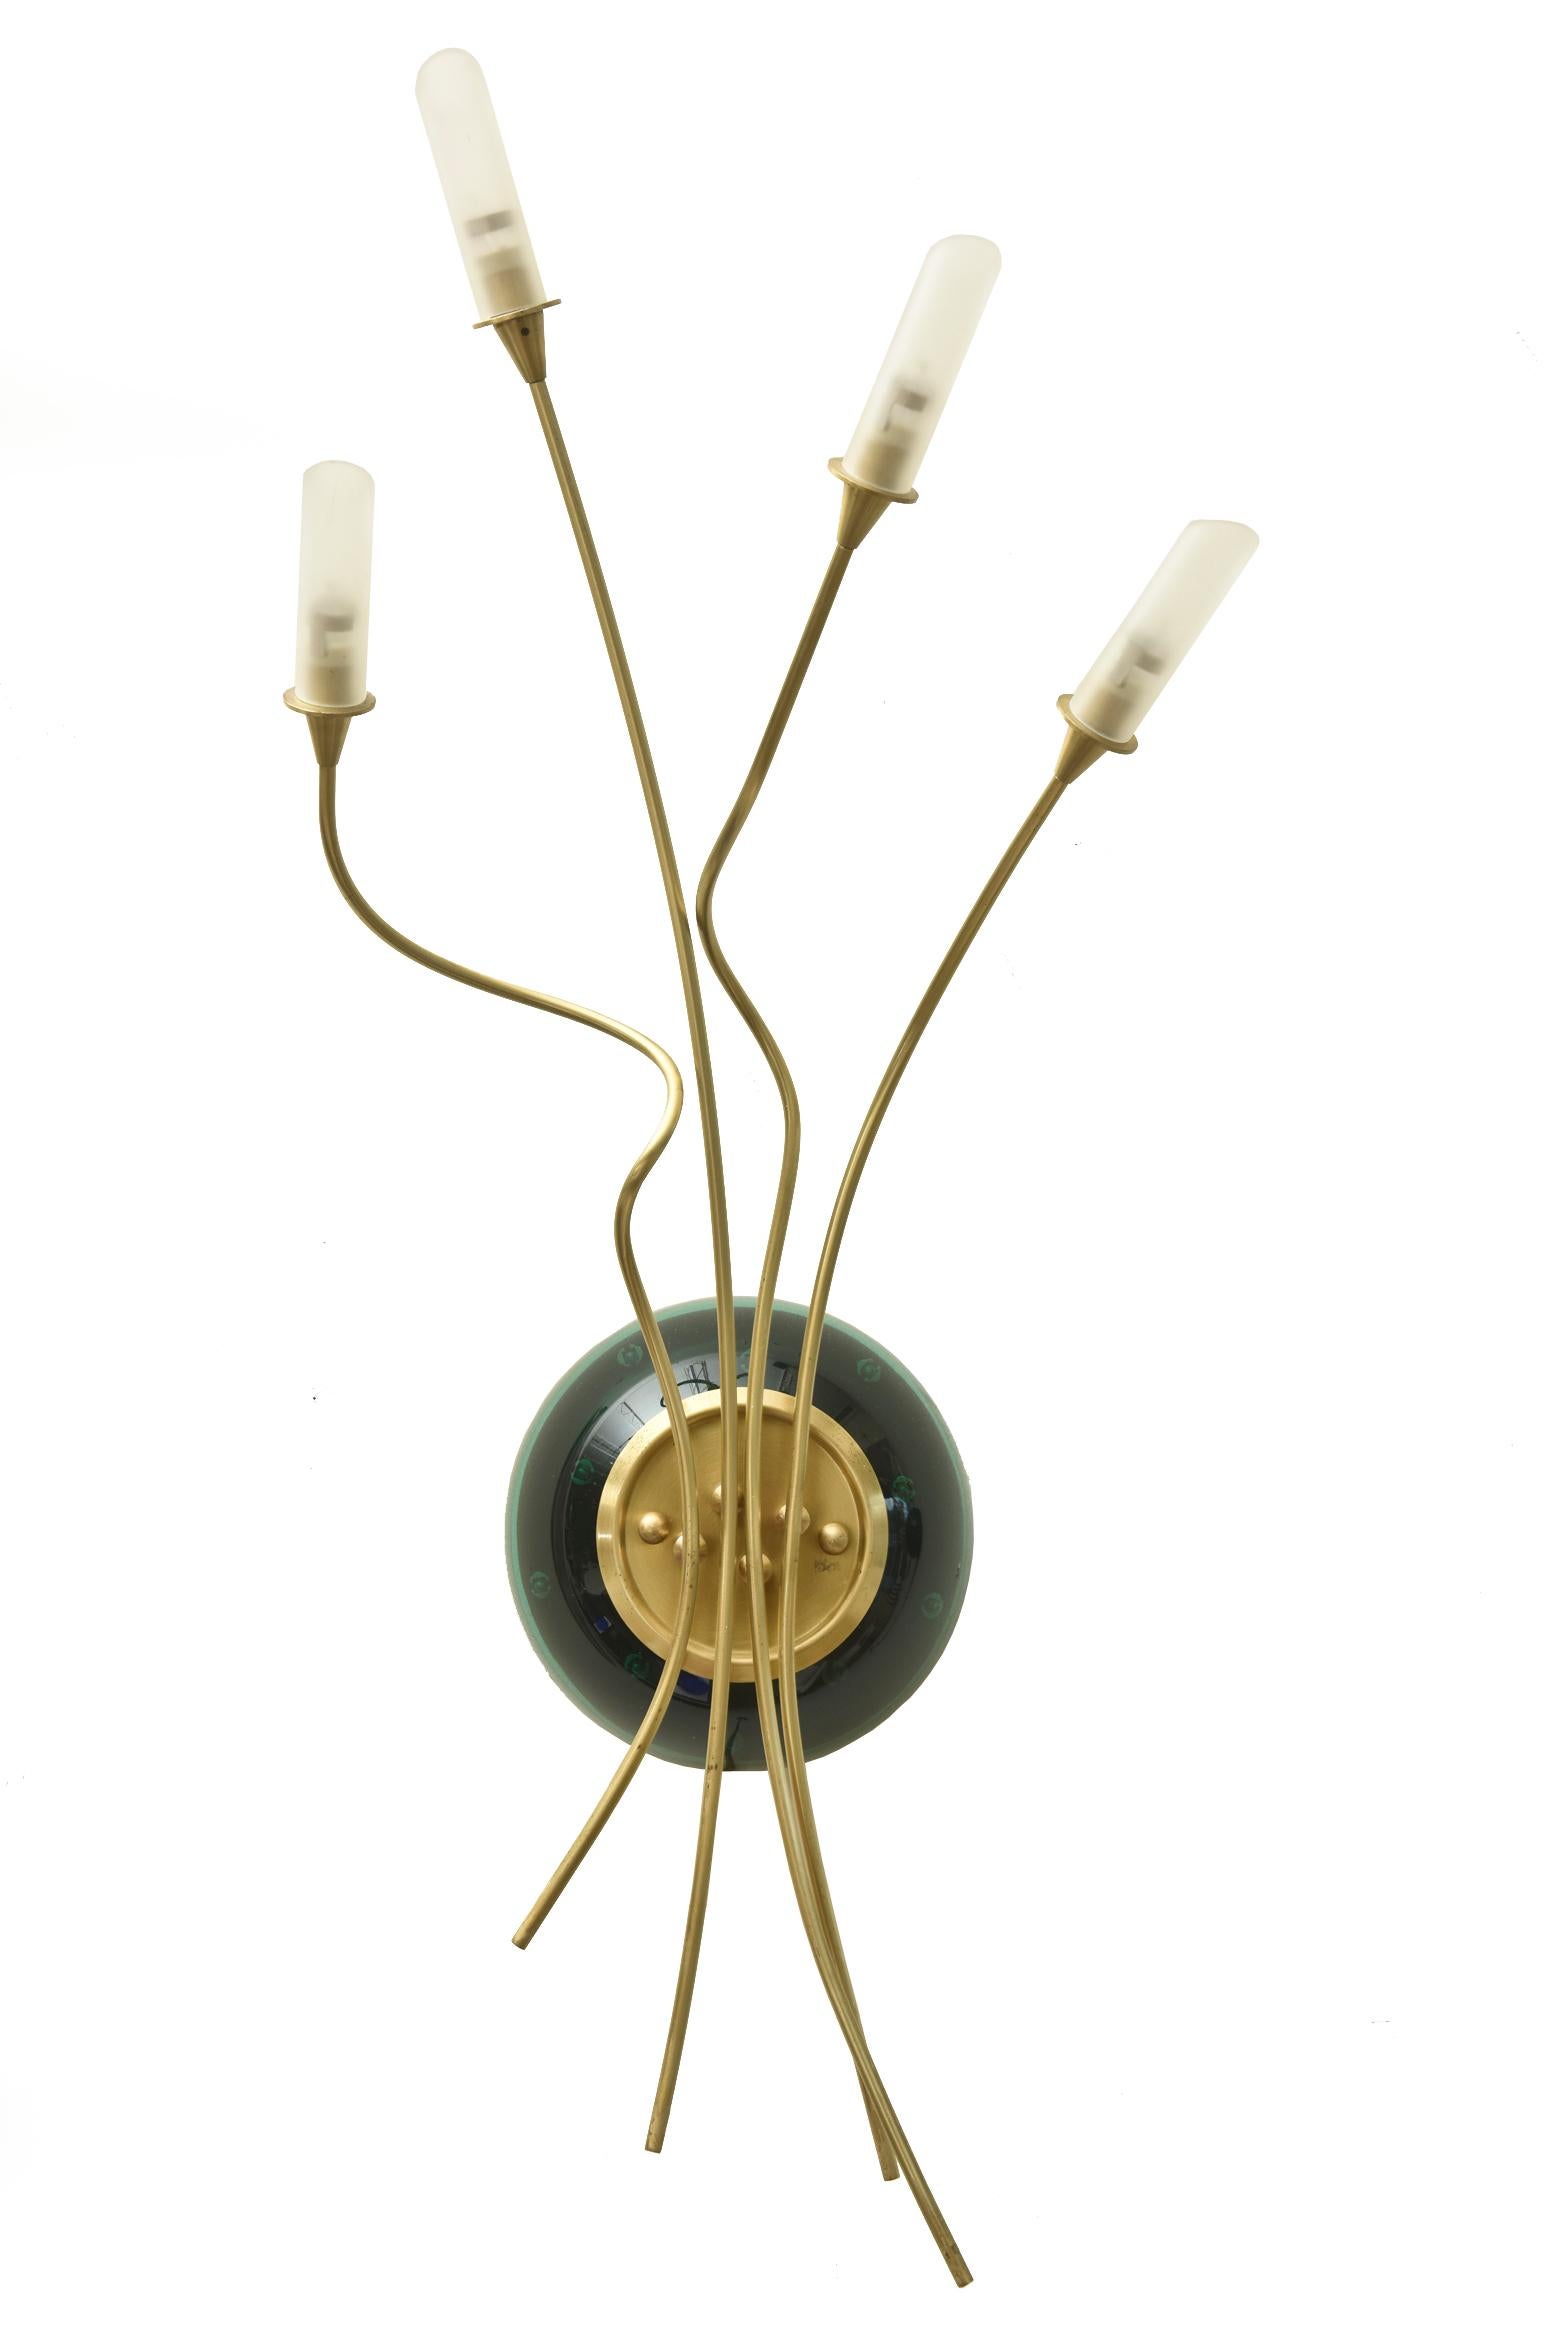 This pair of custom contemporary combination of Murano glass infinity lights and gold plated brass armature make for sculptural wall sconces. Their interested arms create a movement on the wall. The emerald green glass middle portion when lite up